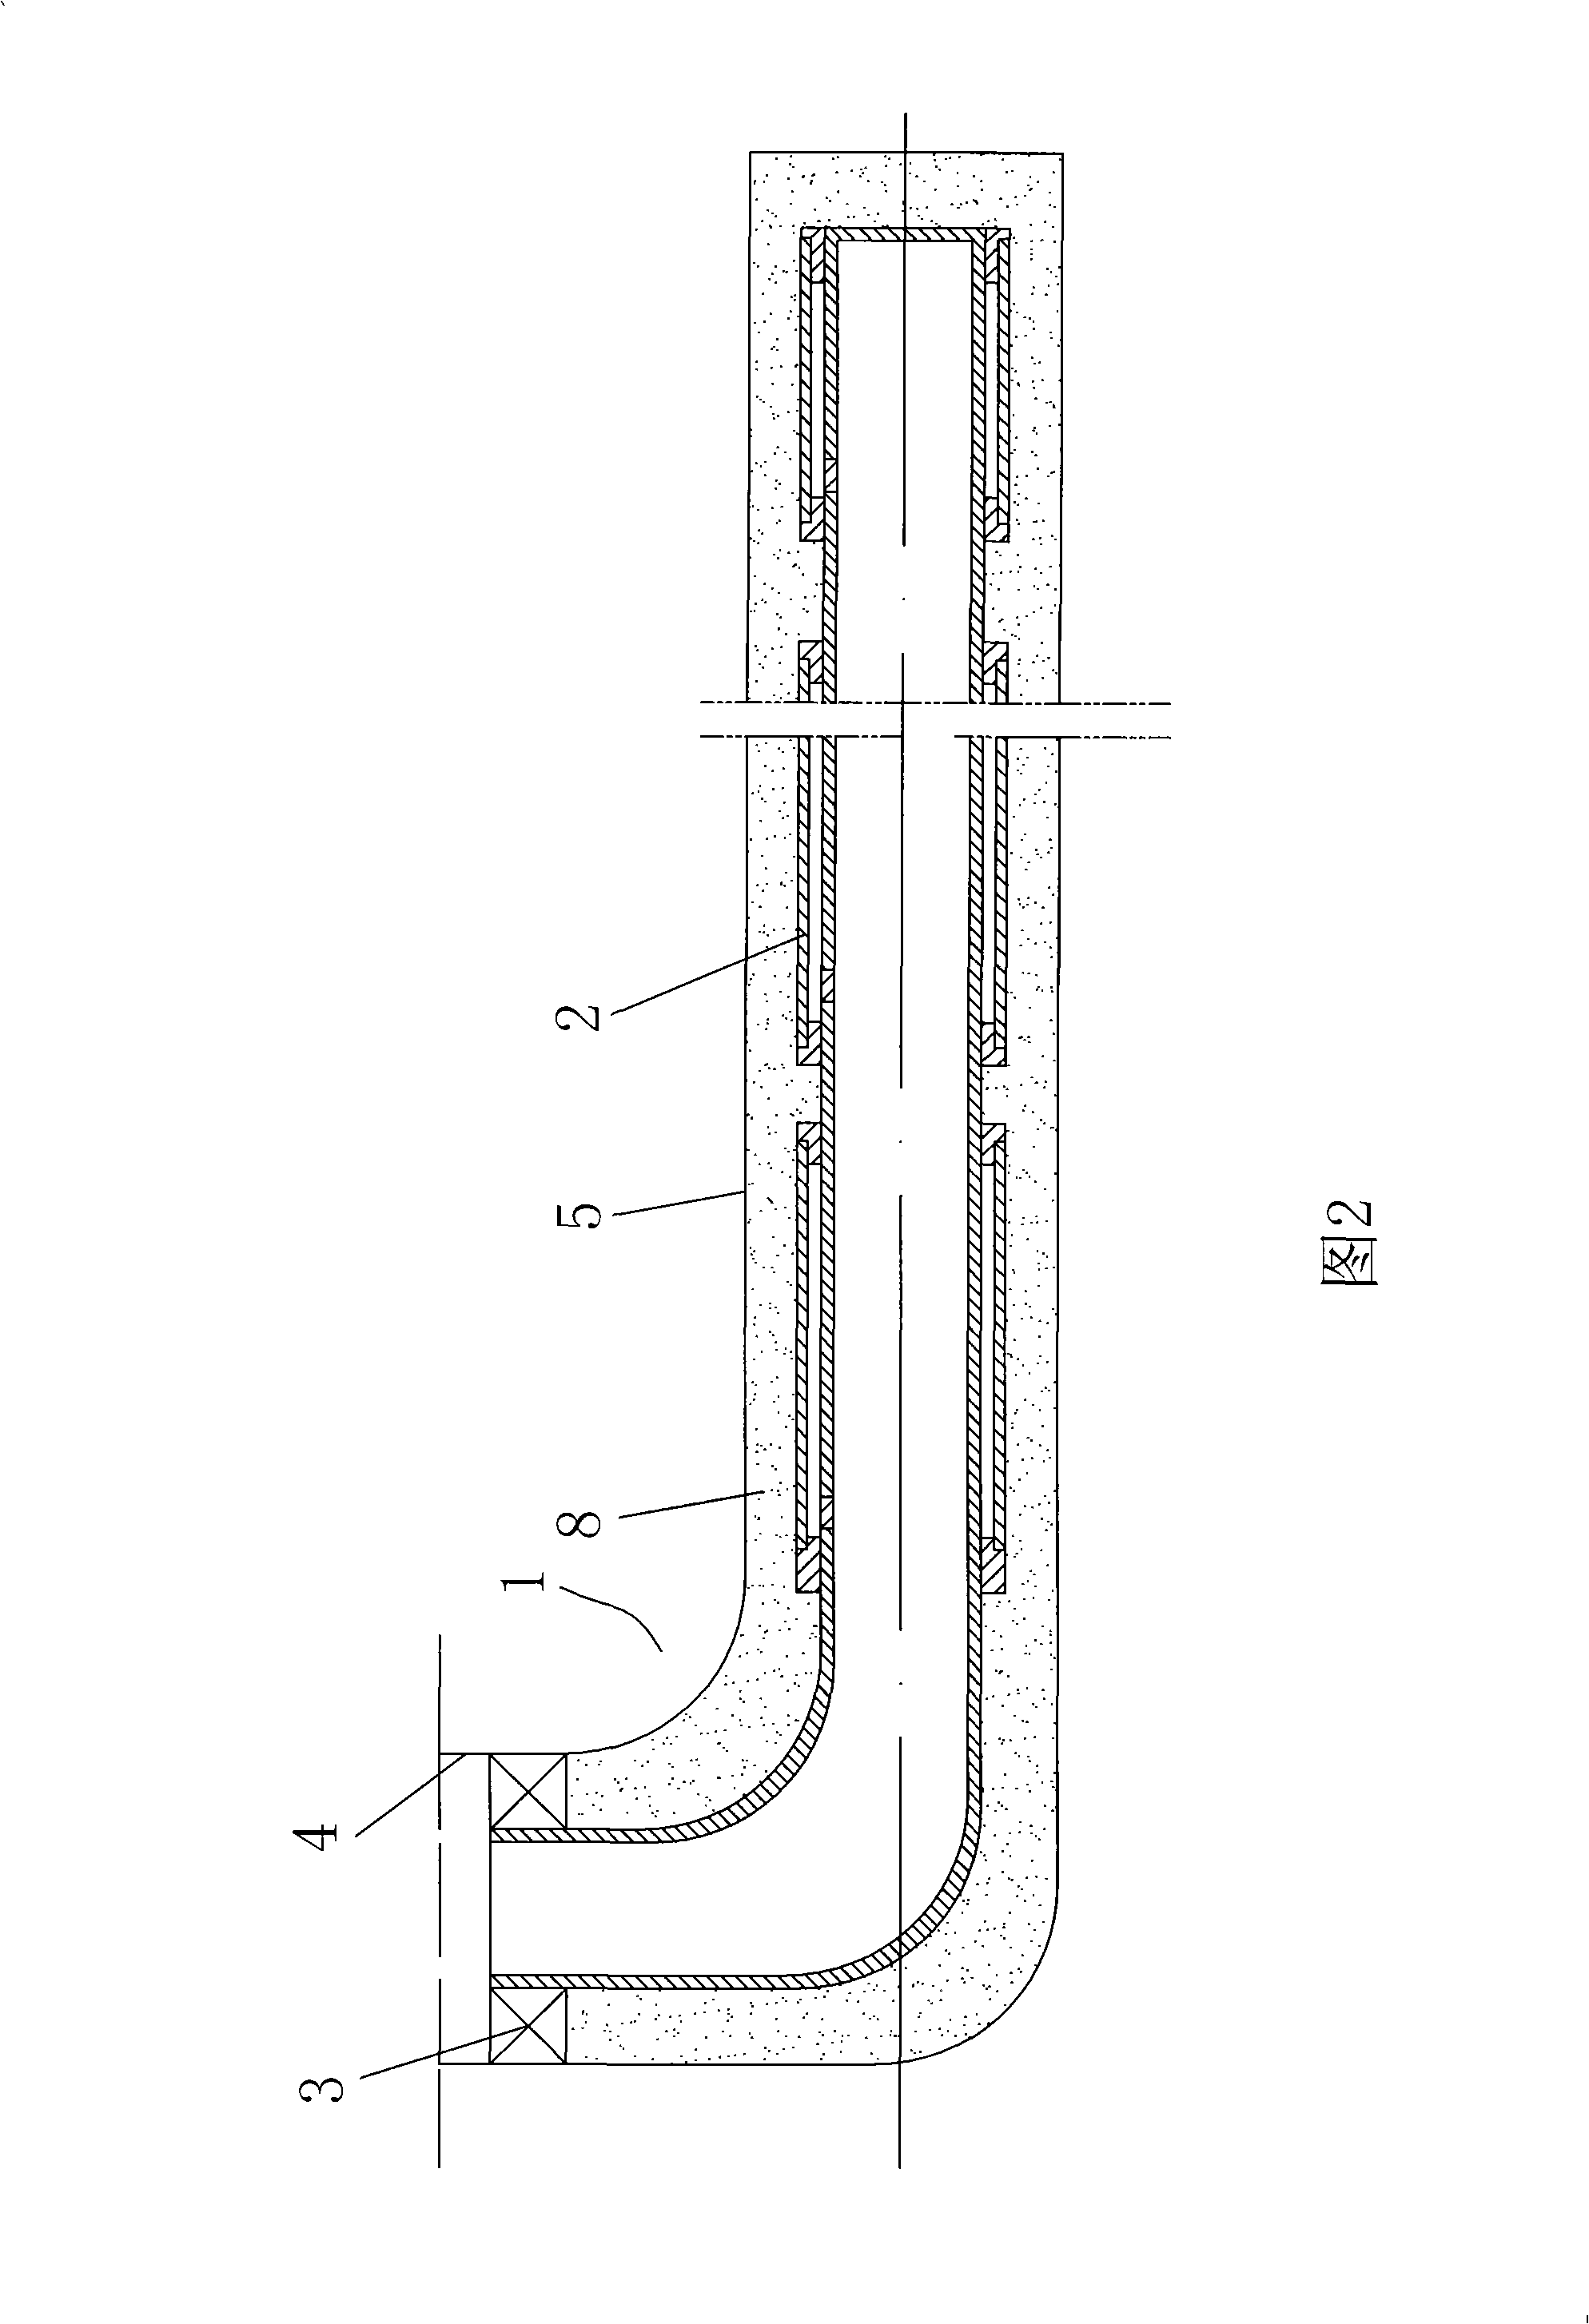 Horizontal production-injection well completion structure possessing flow control function